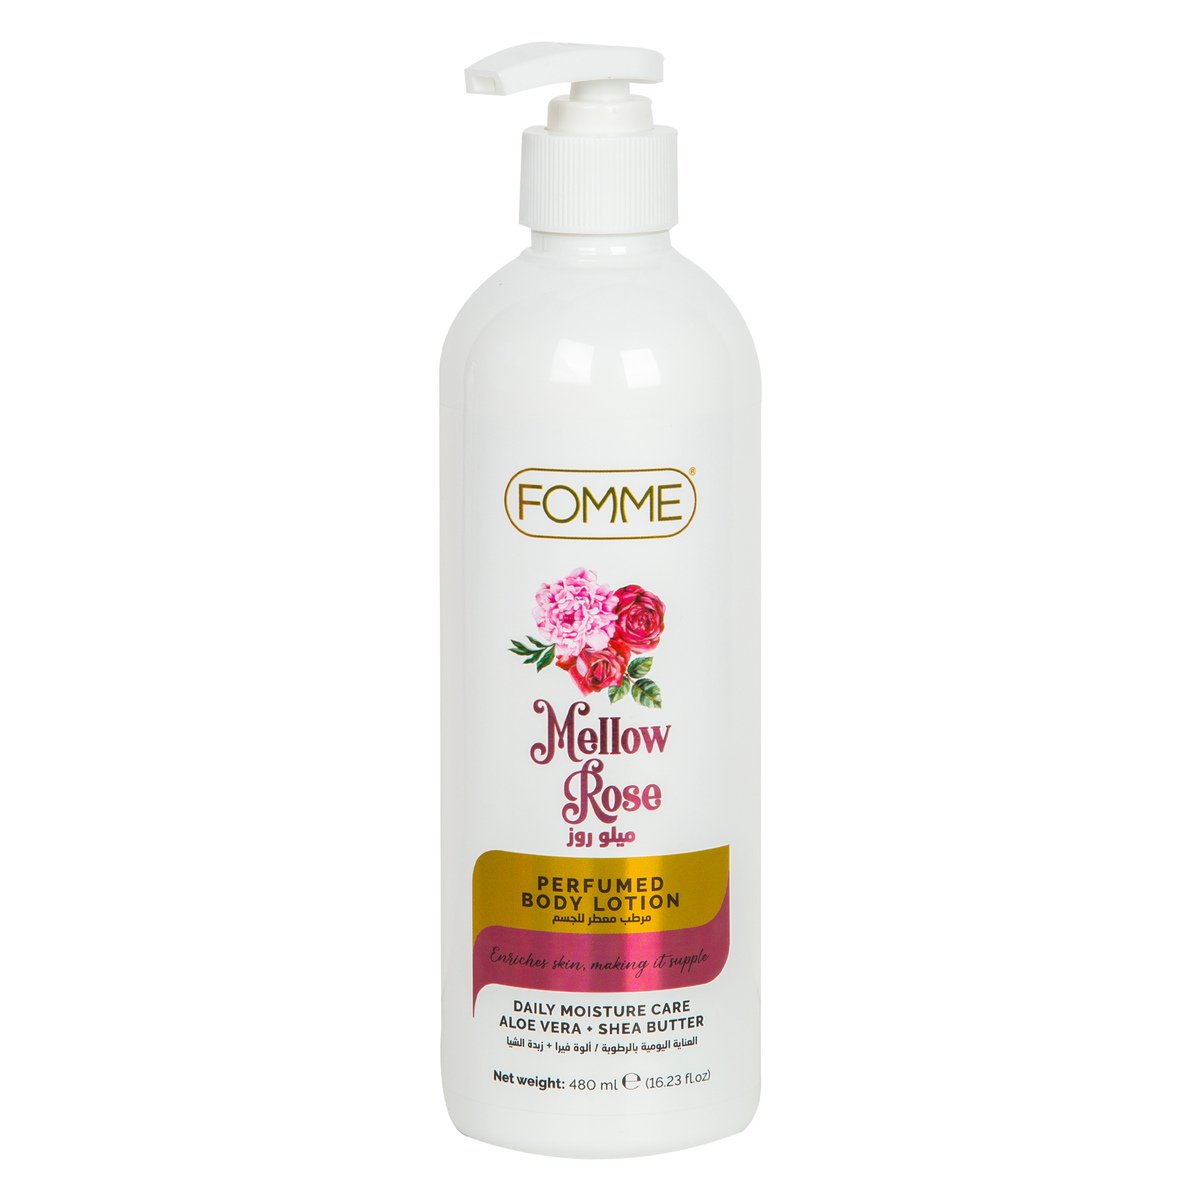 Fomme Mellow Rose Perfumed Body Lotion 480 ml